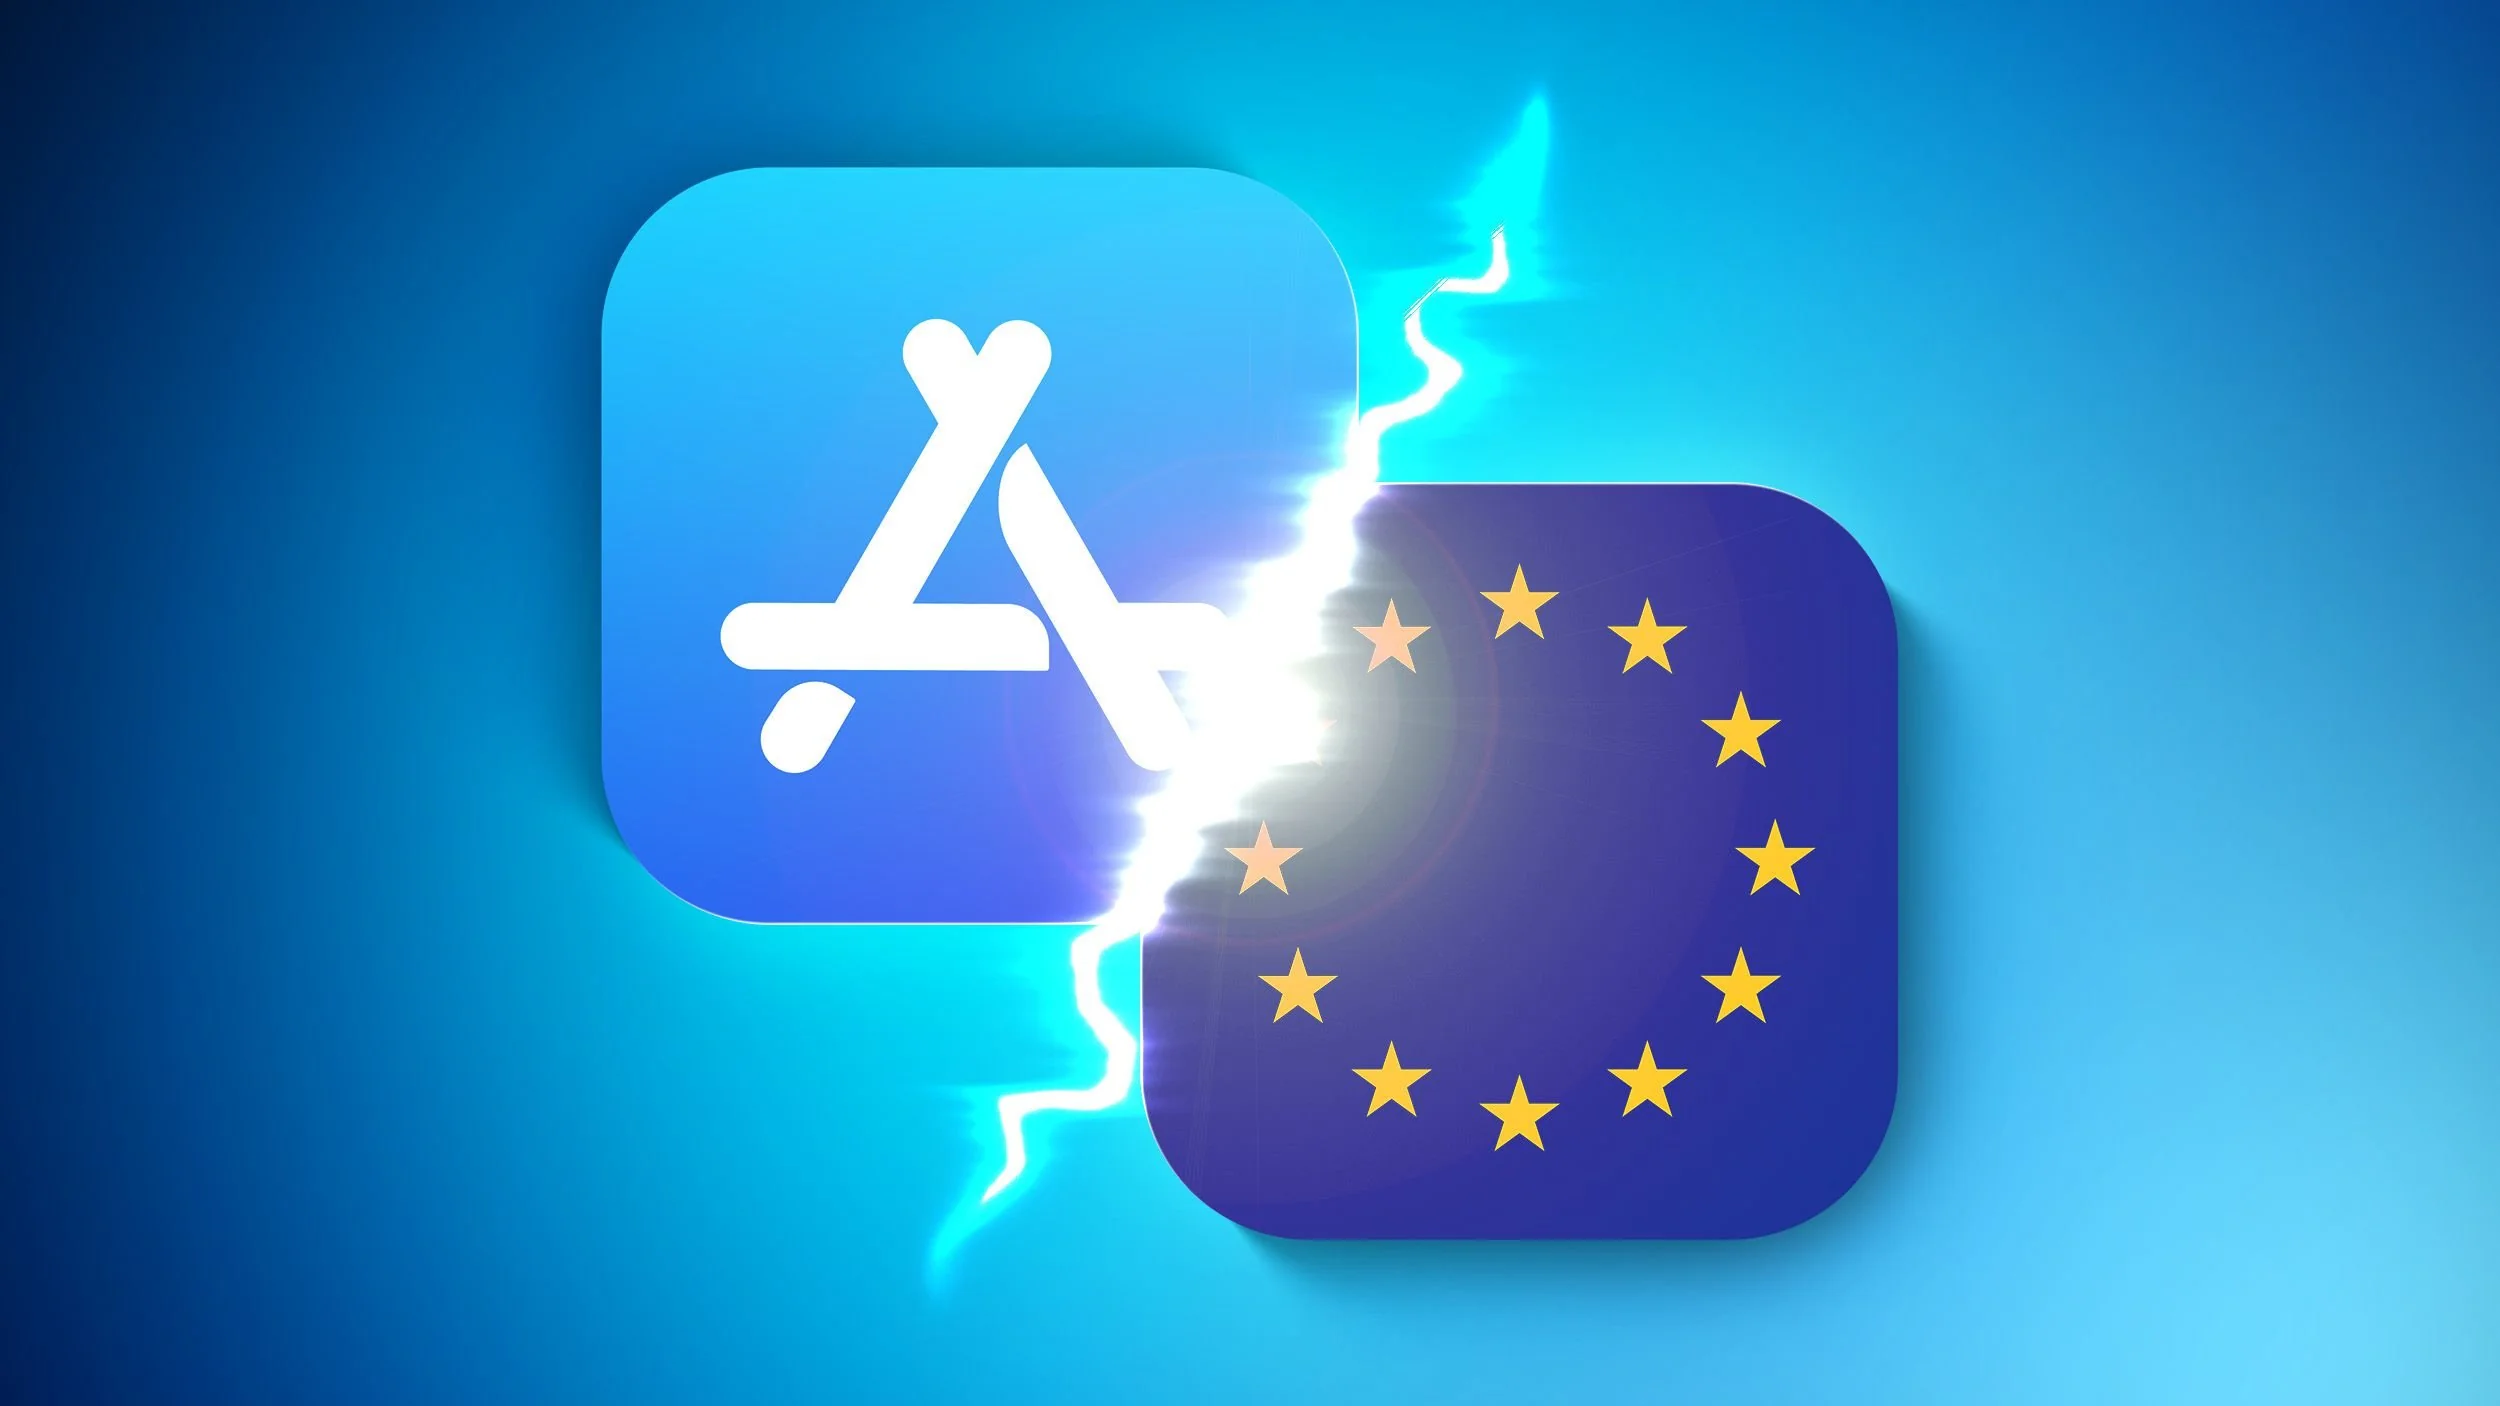 Apple’s Sideloading Policy: Why It’s Allowed in the EU but Restricted Elsewhere